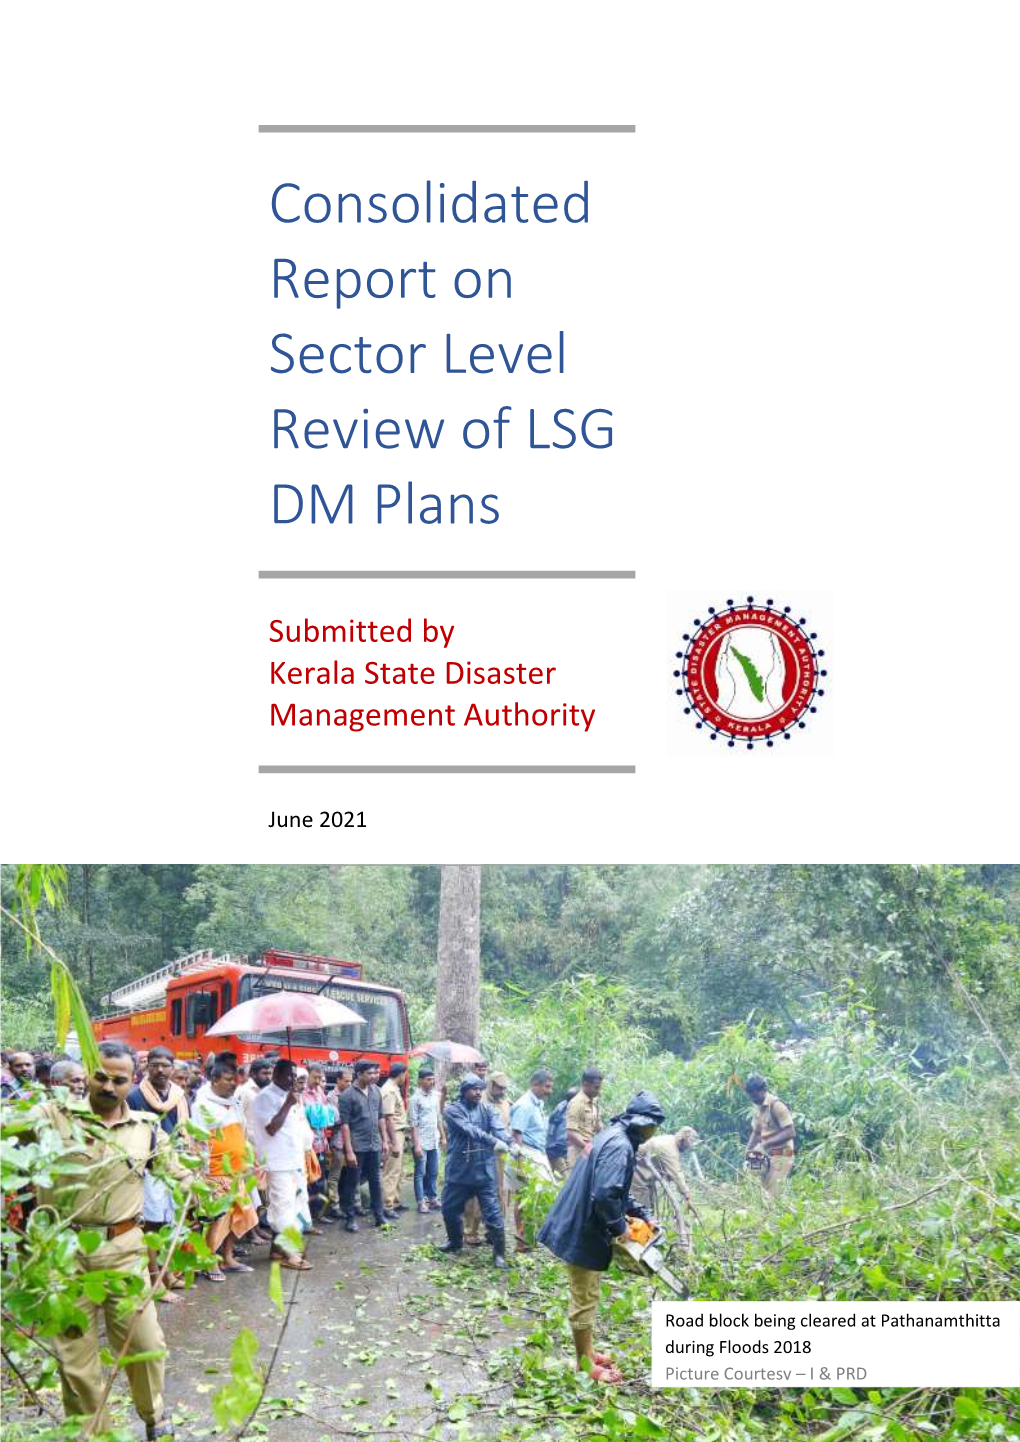 Consolidated Report on Sector Level Review of LSG DM Plans